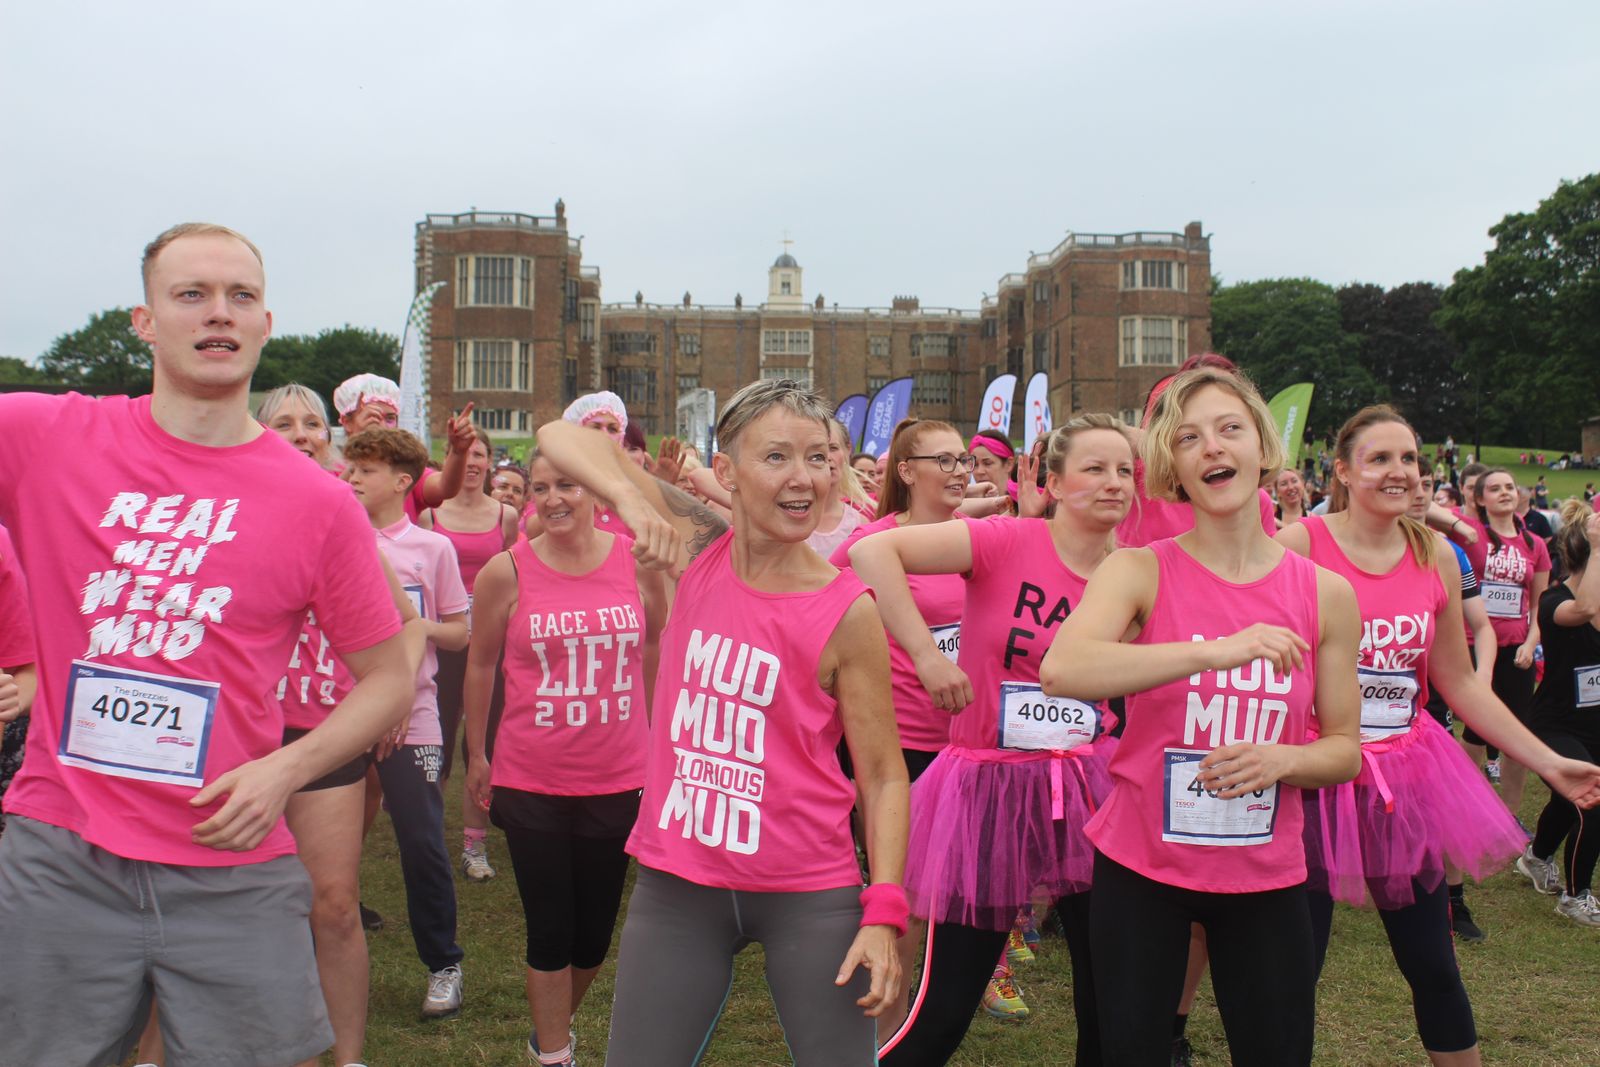 Race for Life in Yorkshire